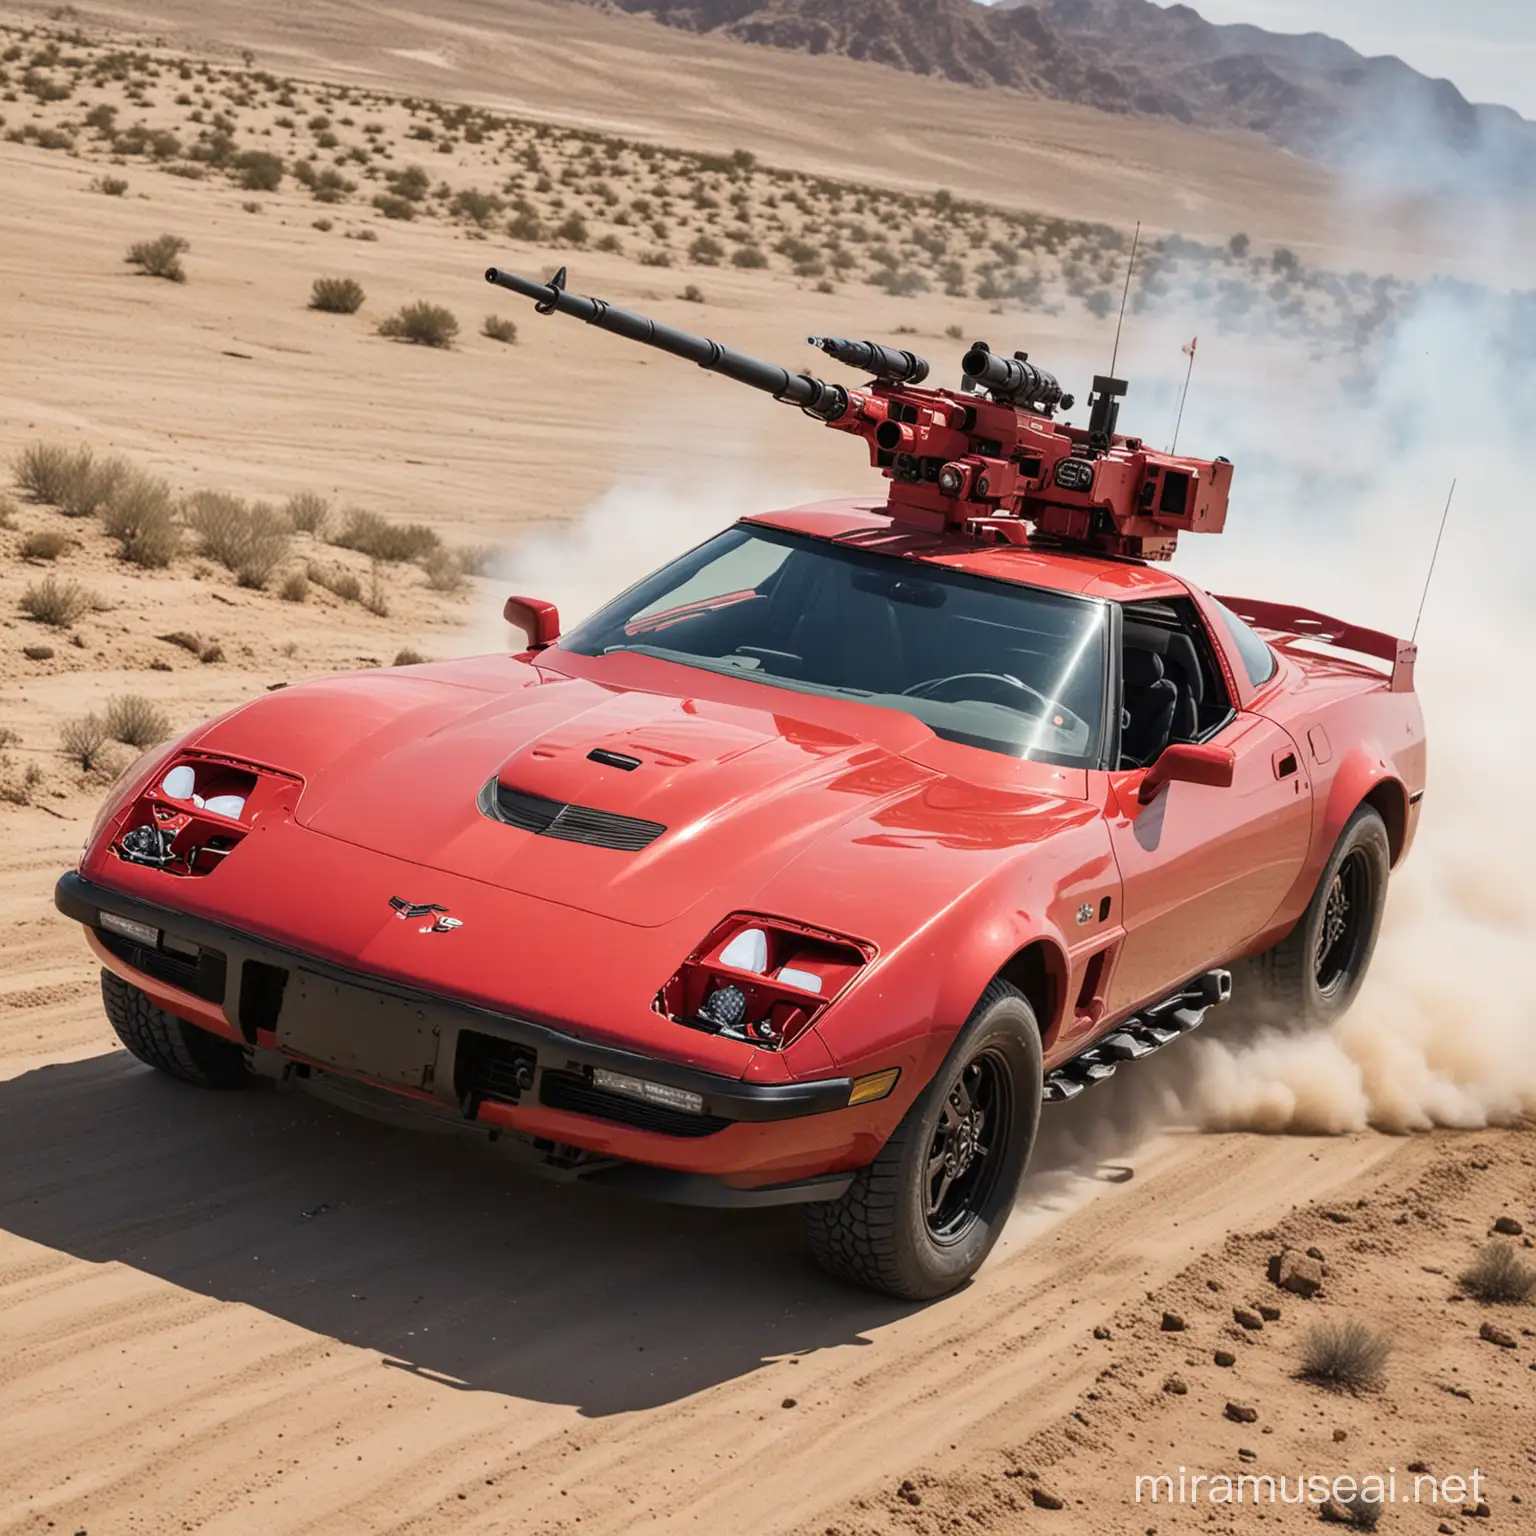 Red c4 corvette with a missile launcher and machine guns